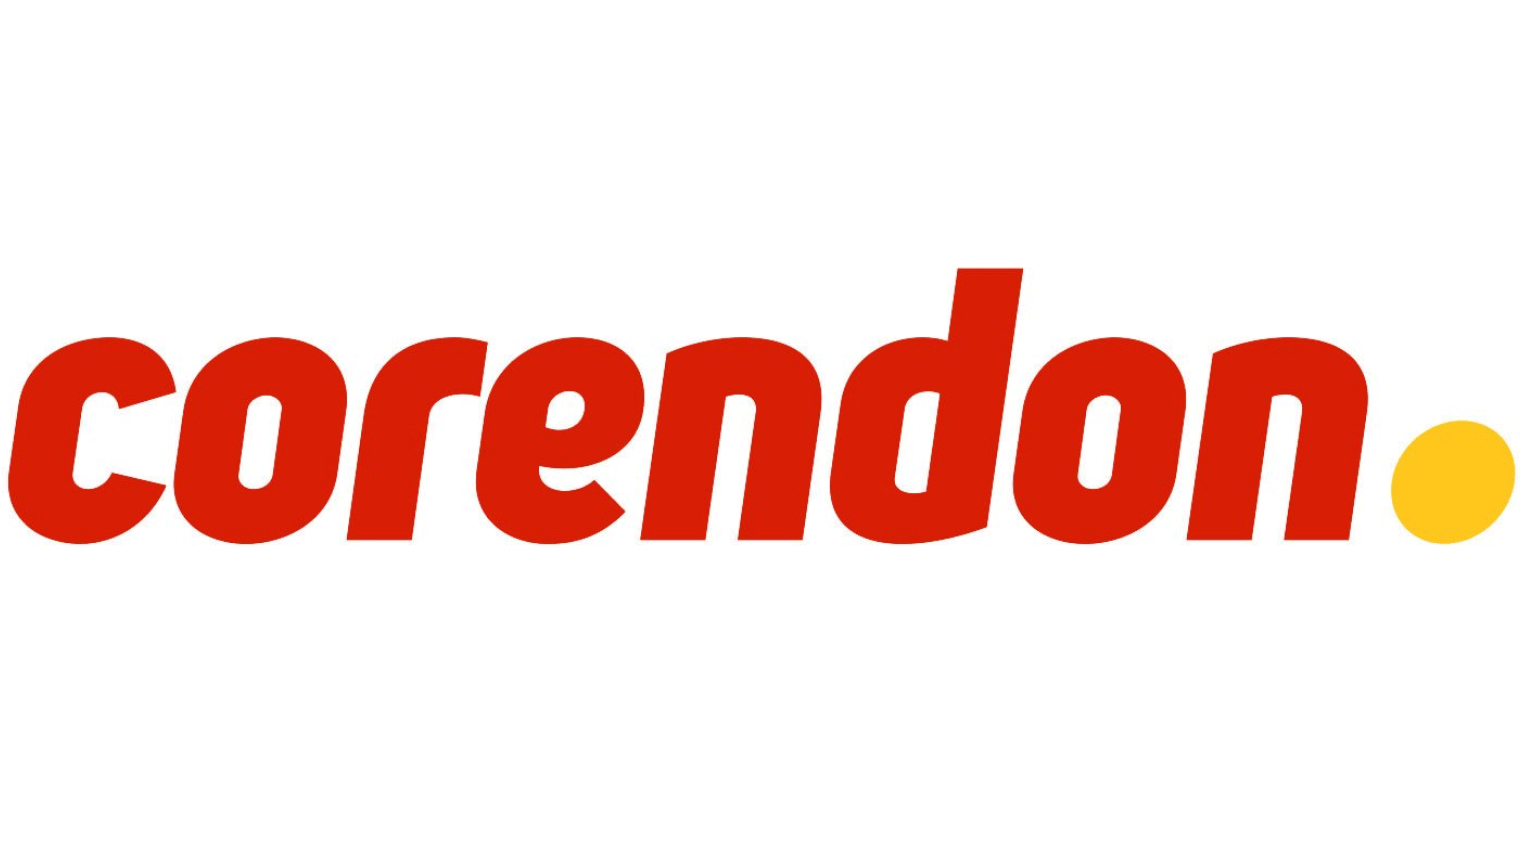 Corendon Airlines クーポン 